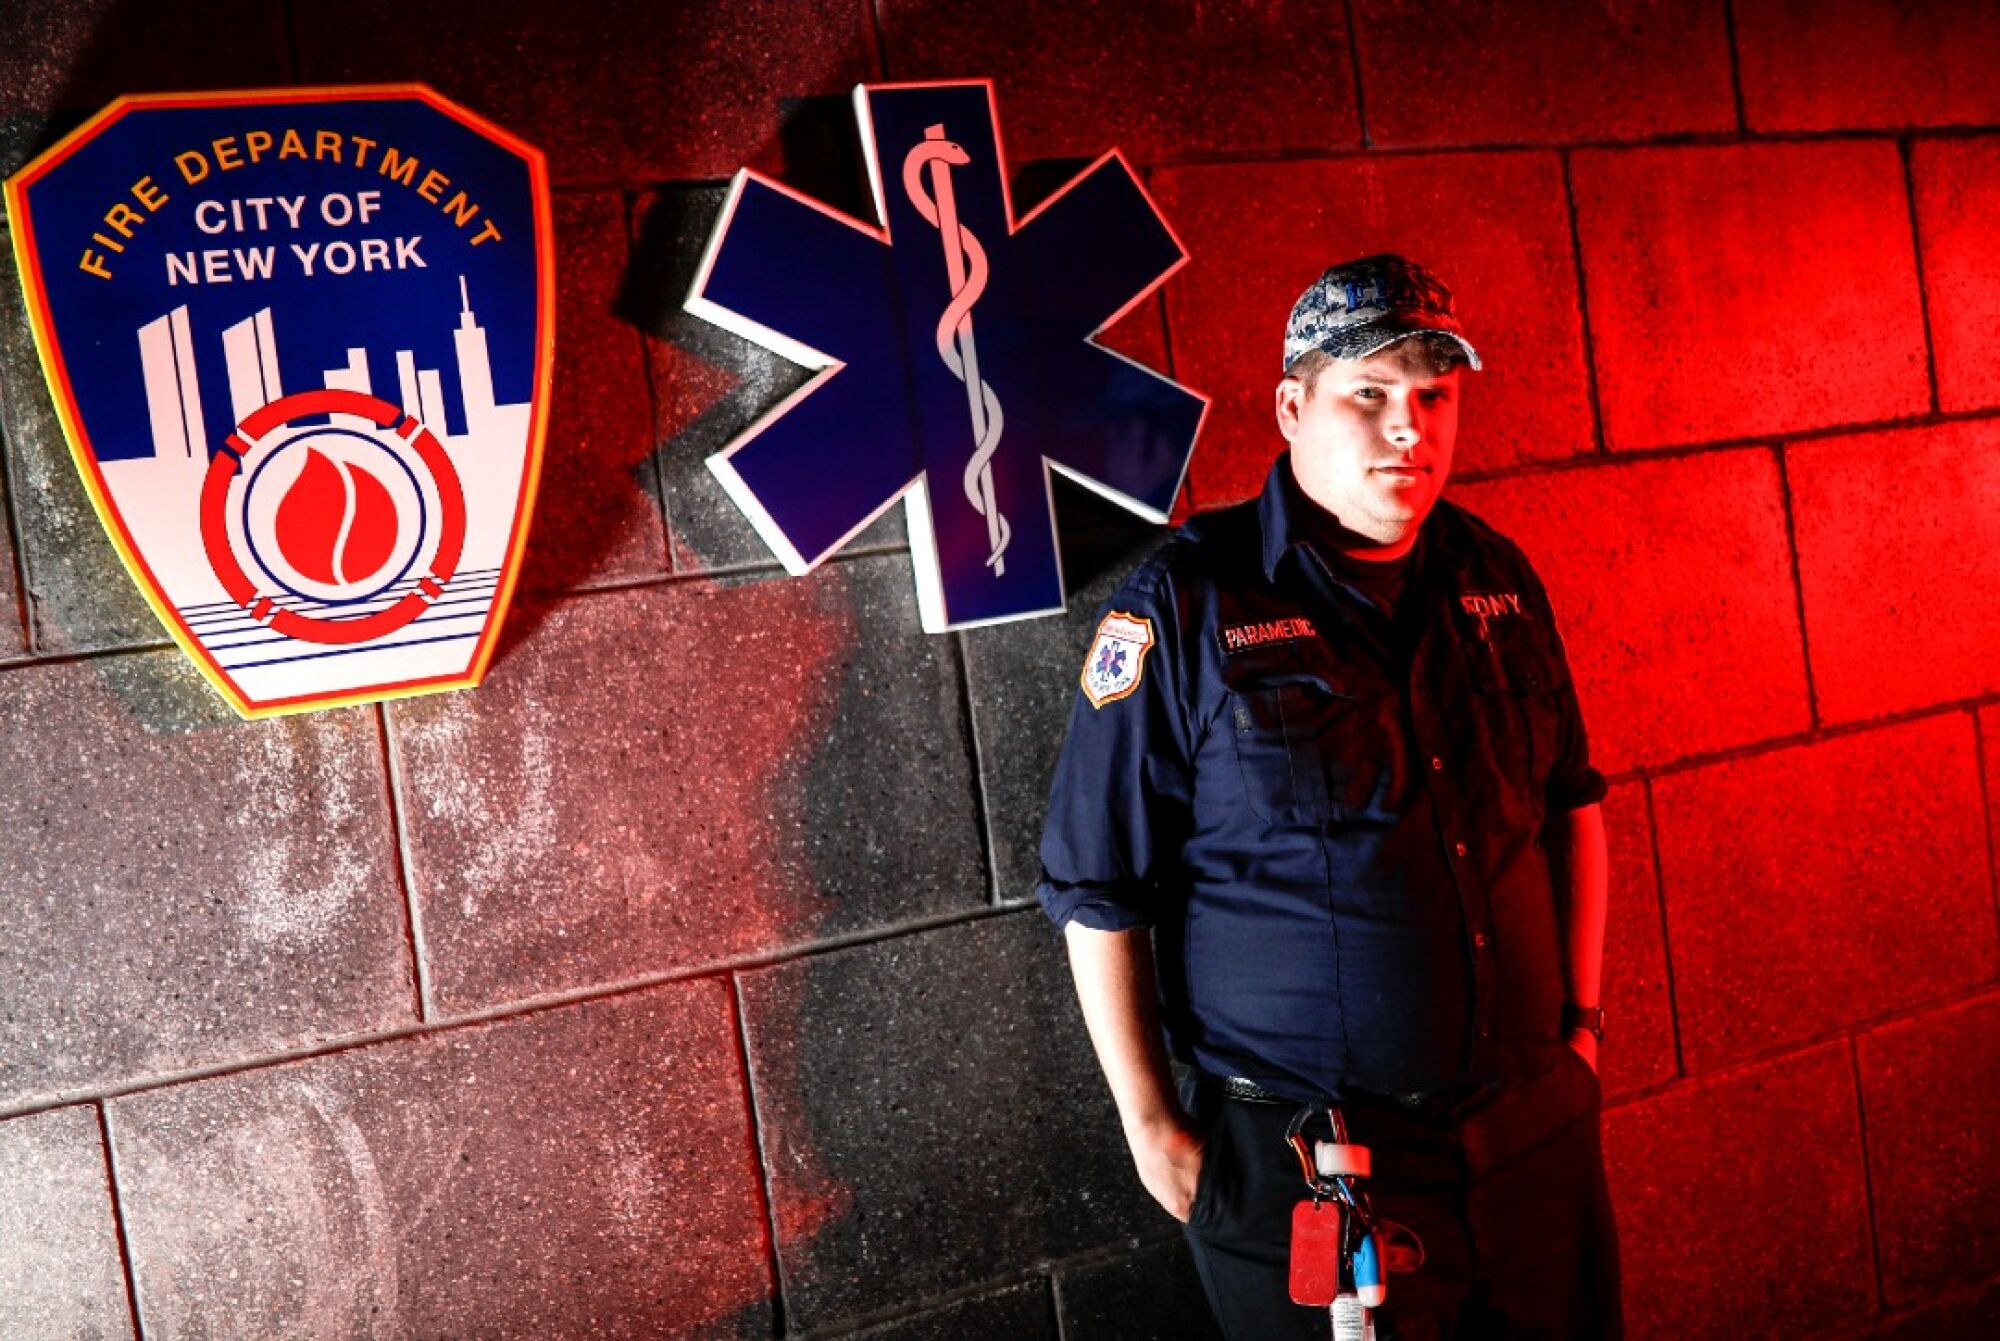 Paramedic Travis Kessel has done ambulance work since he was 16, but he’s never weathered anything like this.